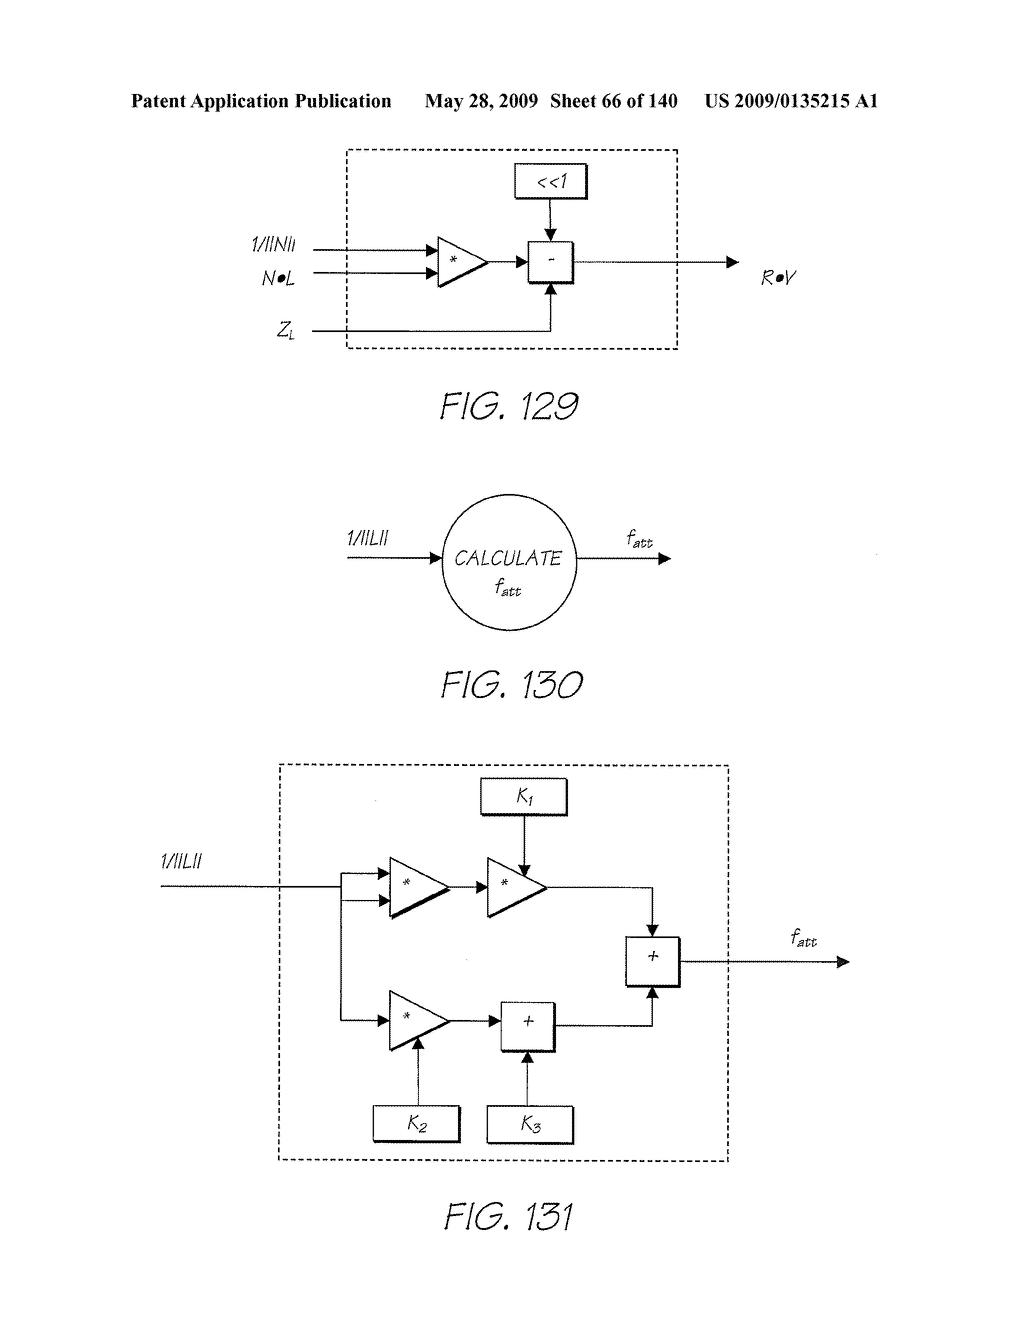 CAMERA DEVICE INCORPORATING A COLOR PRINTER WITH INK VALIDATION APPARATUS - diagram, schematic, and image 67